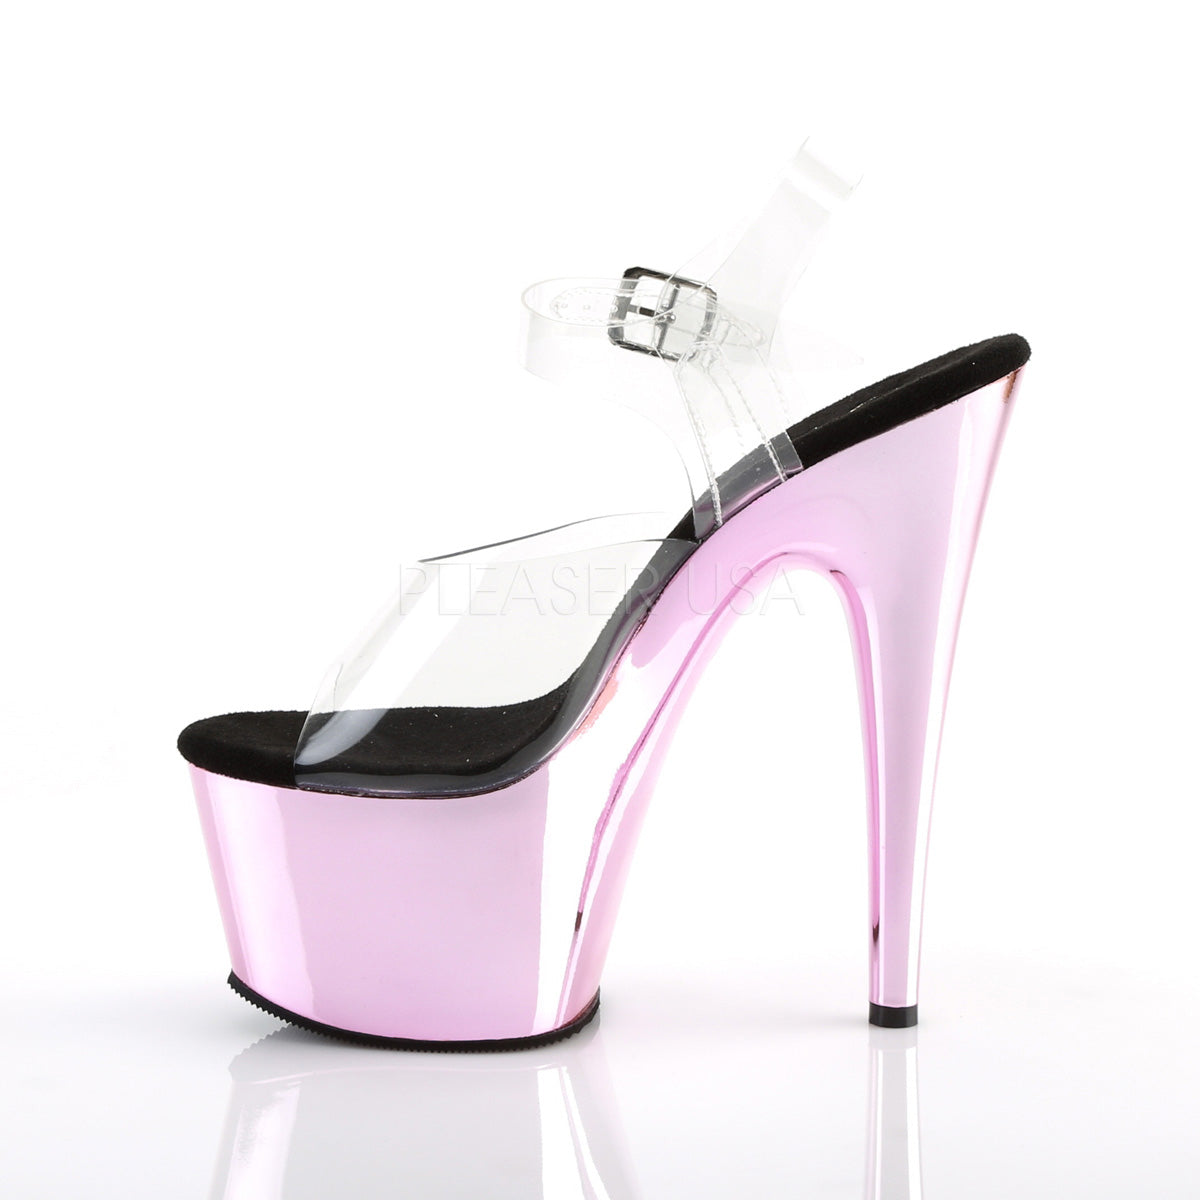 7 Inch Heel ADORE-708 Baby Pink Chrome